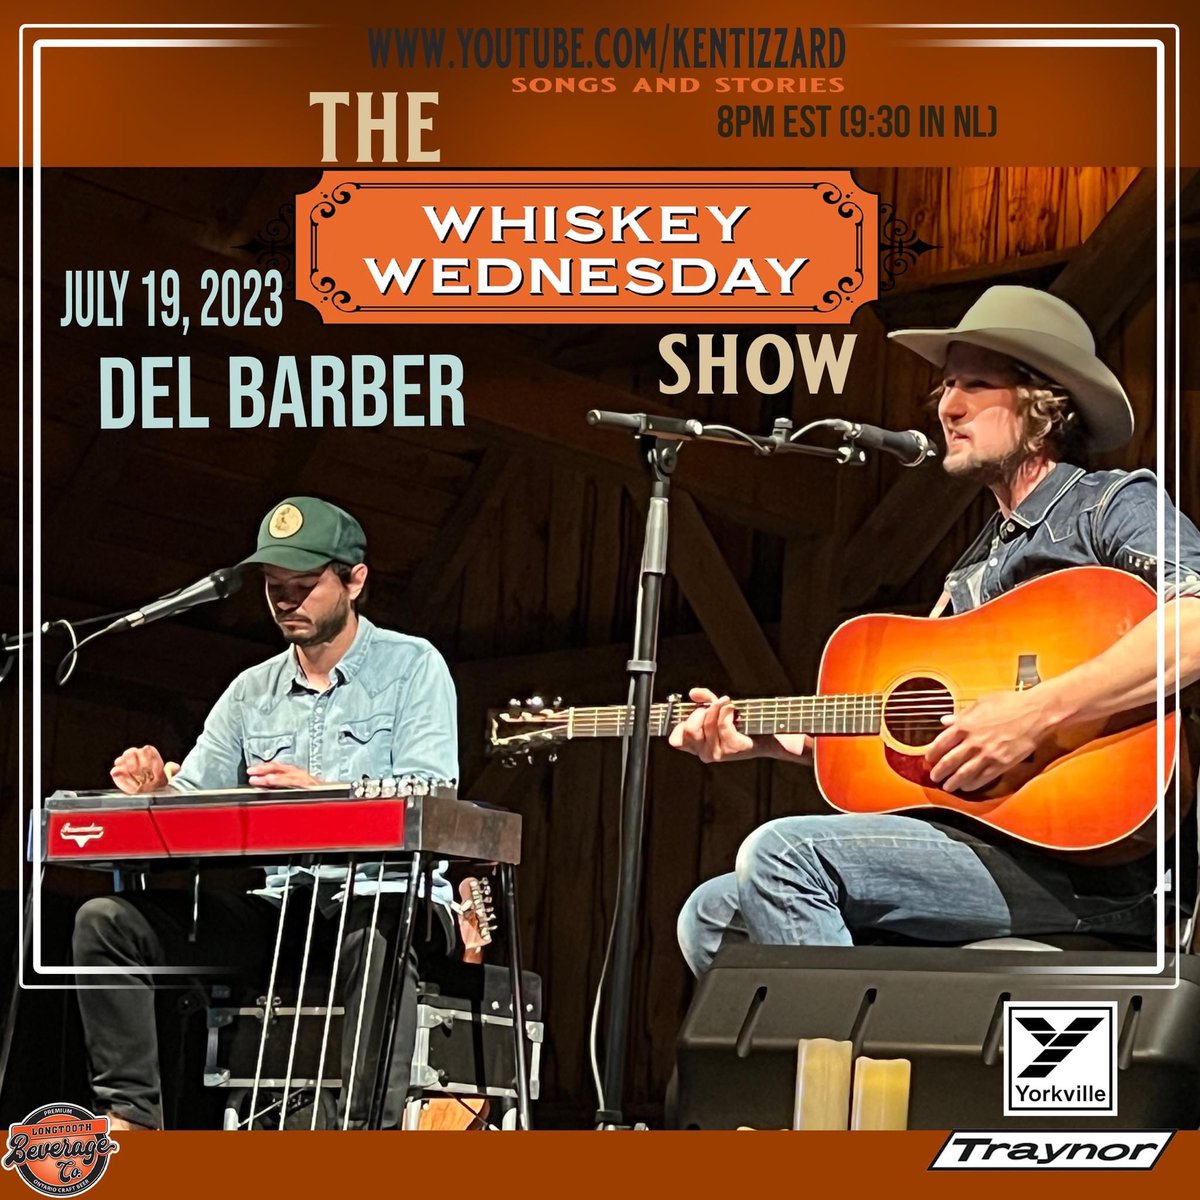 Tonight on The Whiskey Wednesday Show special guest Del Barber tune in at 8PM EST on Youtube at youtube.com/kentizzard or on FB ast facebook.com/kentizzardmusic @delbarberino @AcronymRecords